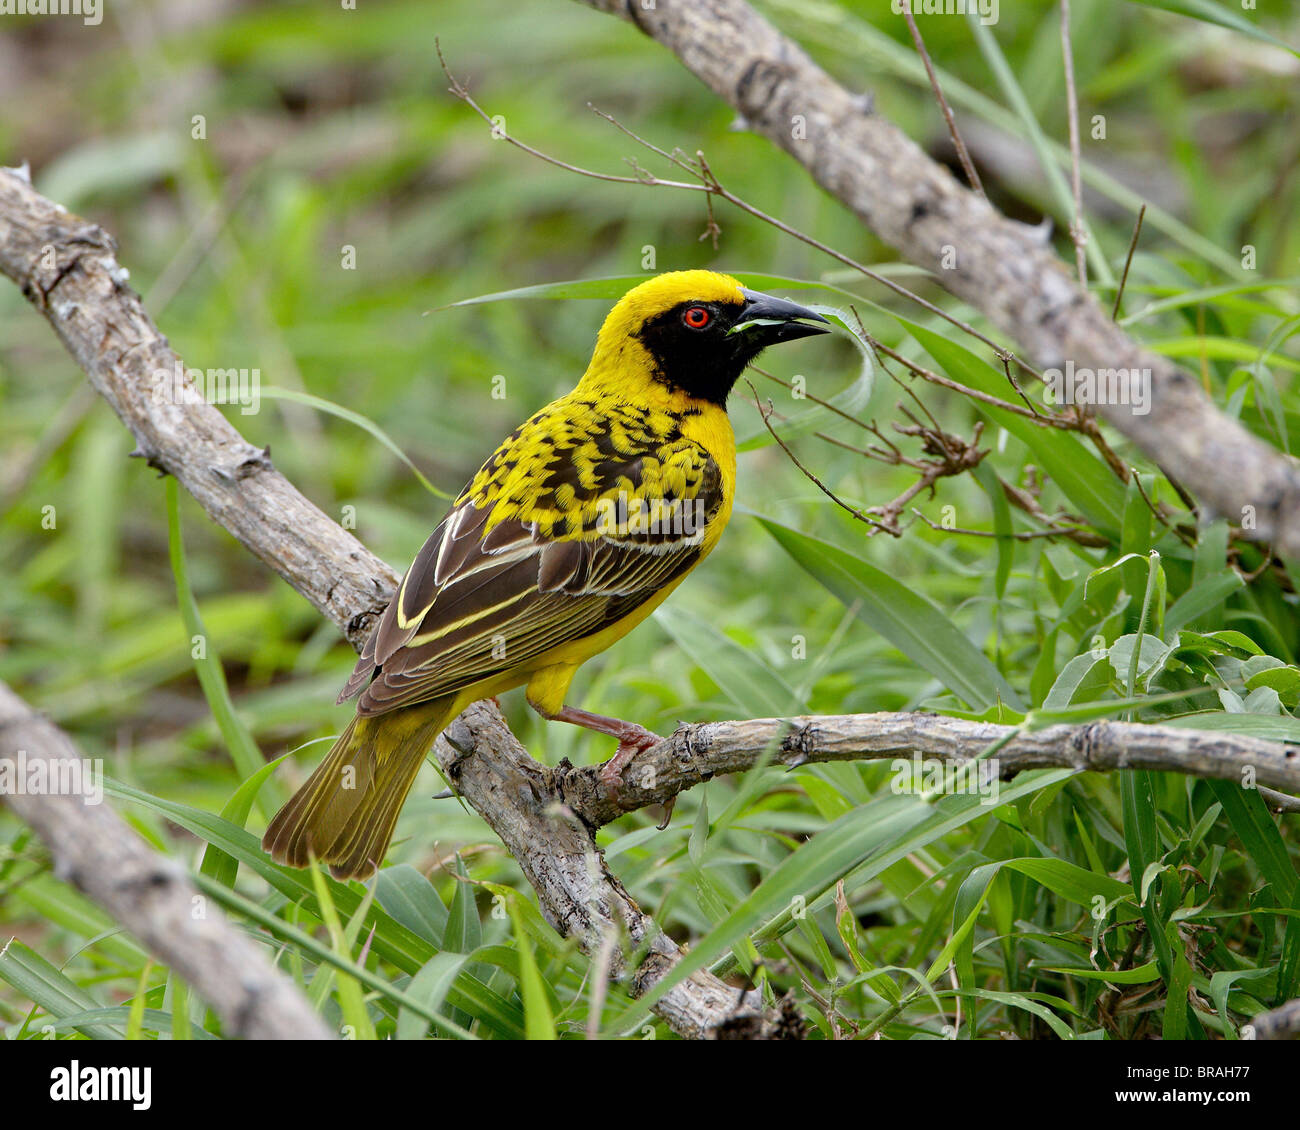 Male Spotted-backed weaver collecting grass for his nest, Addo Elephant National Park, South Africa Stock Photo